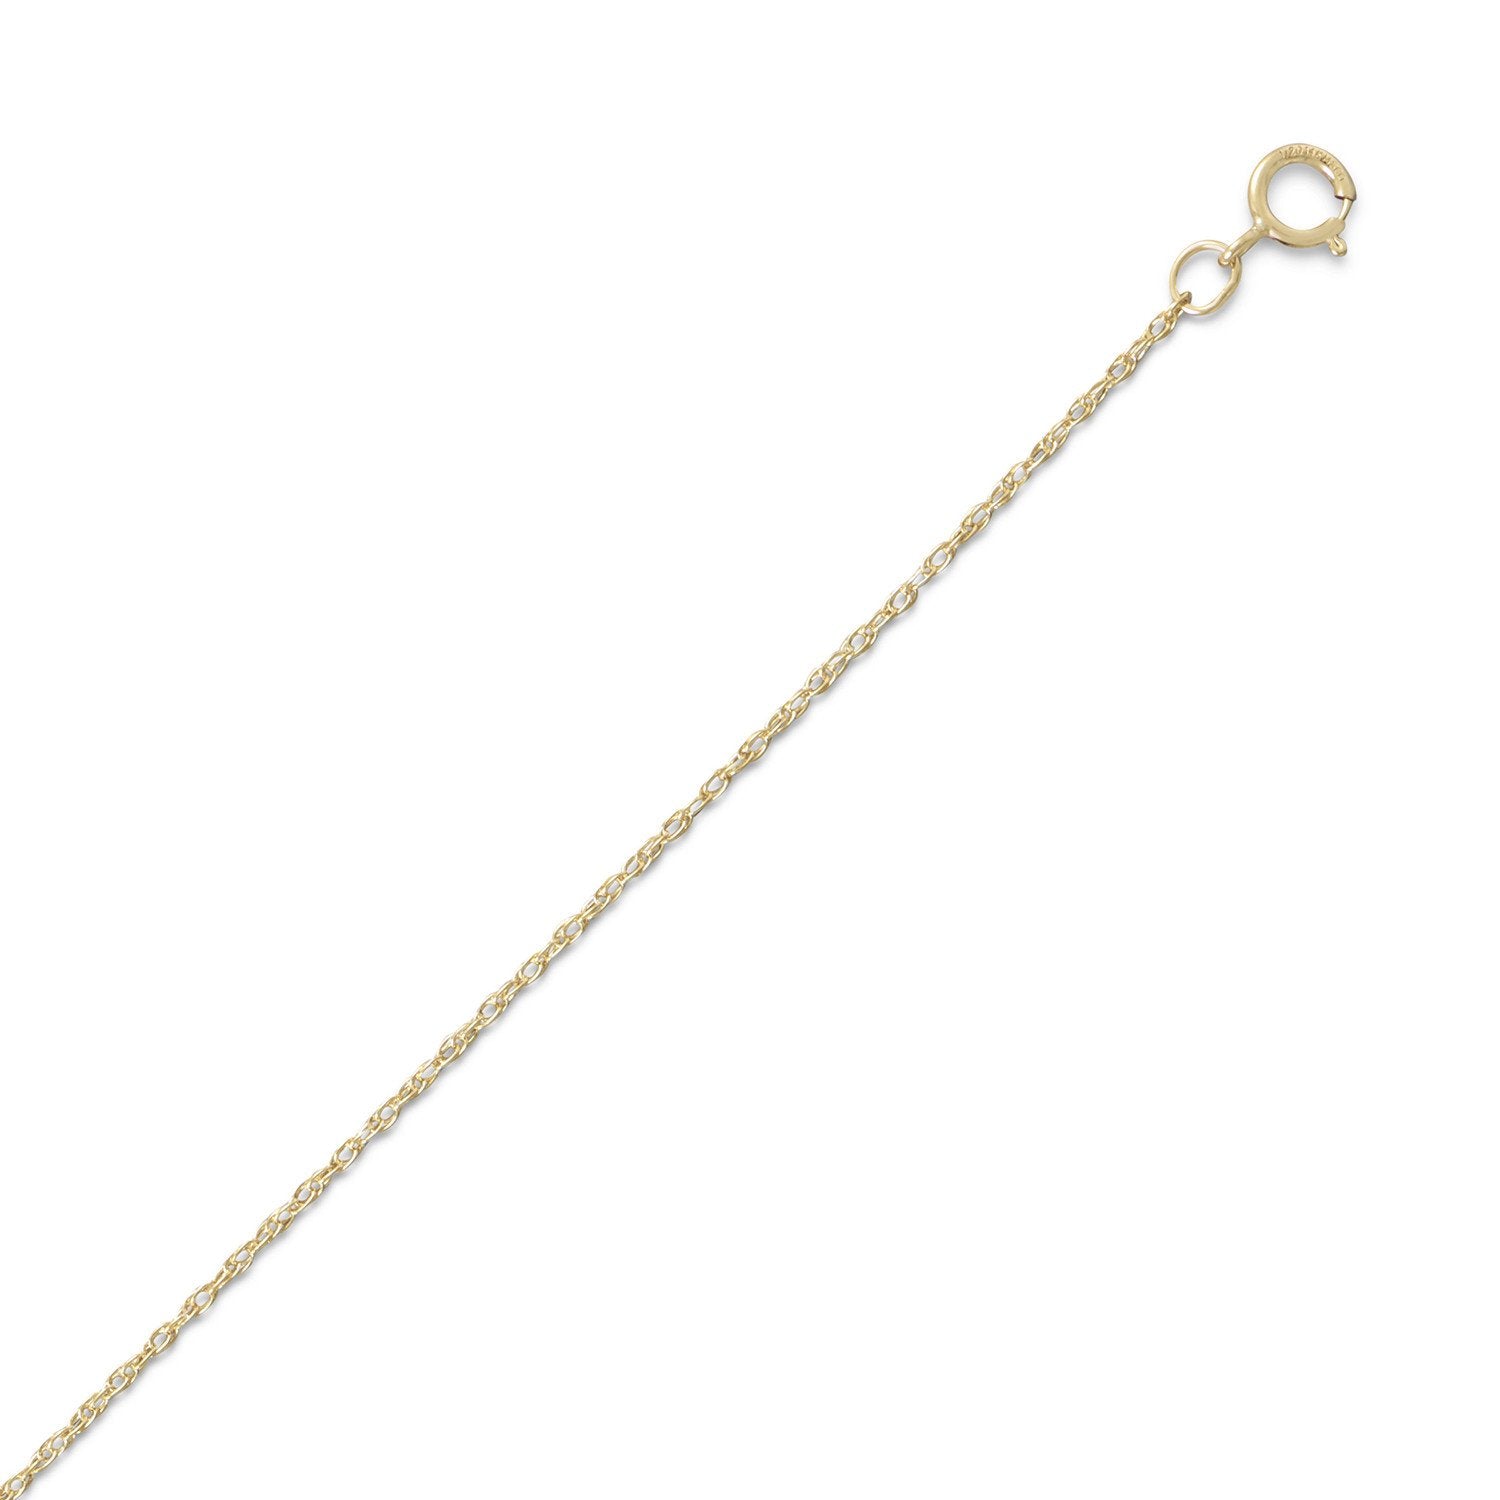 14/20 Gold Filled Rope Chain Necklace (1.1mm) - Joyeria Lady